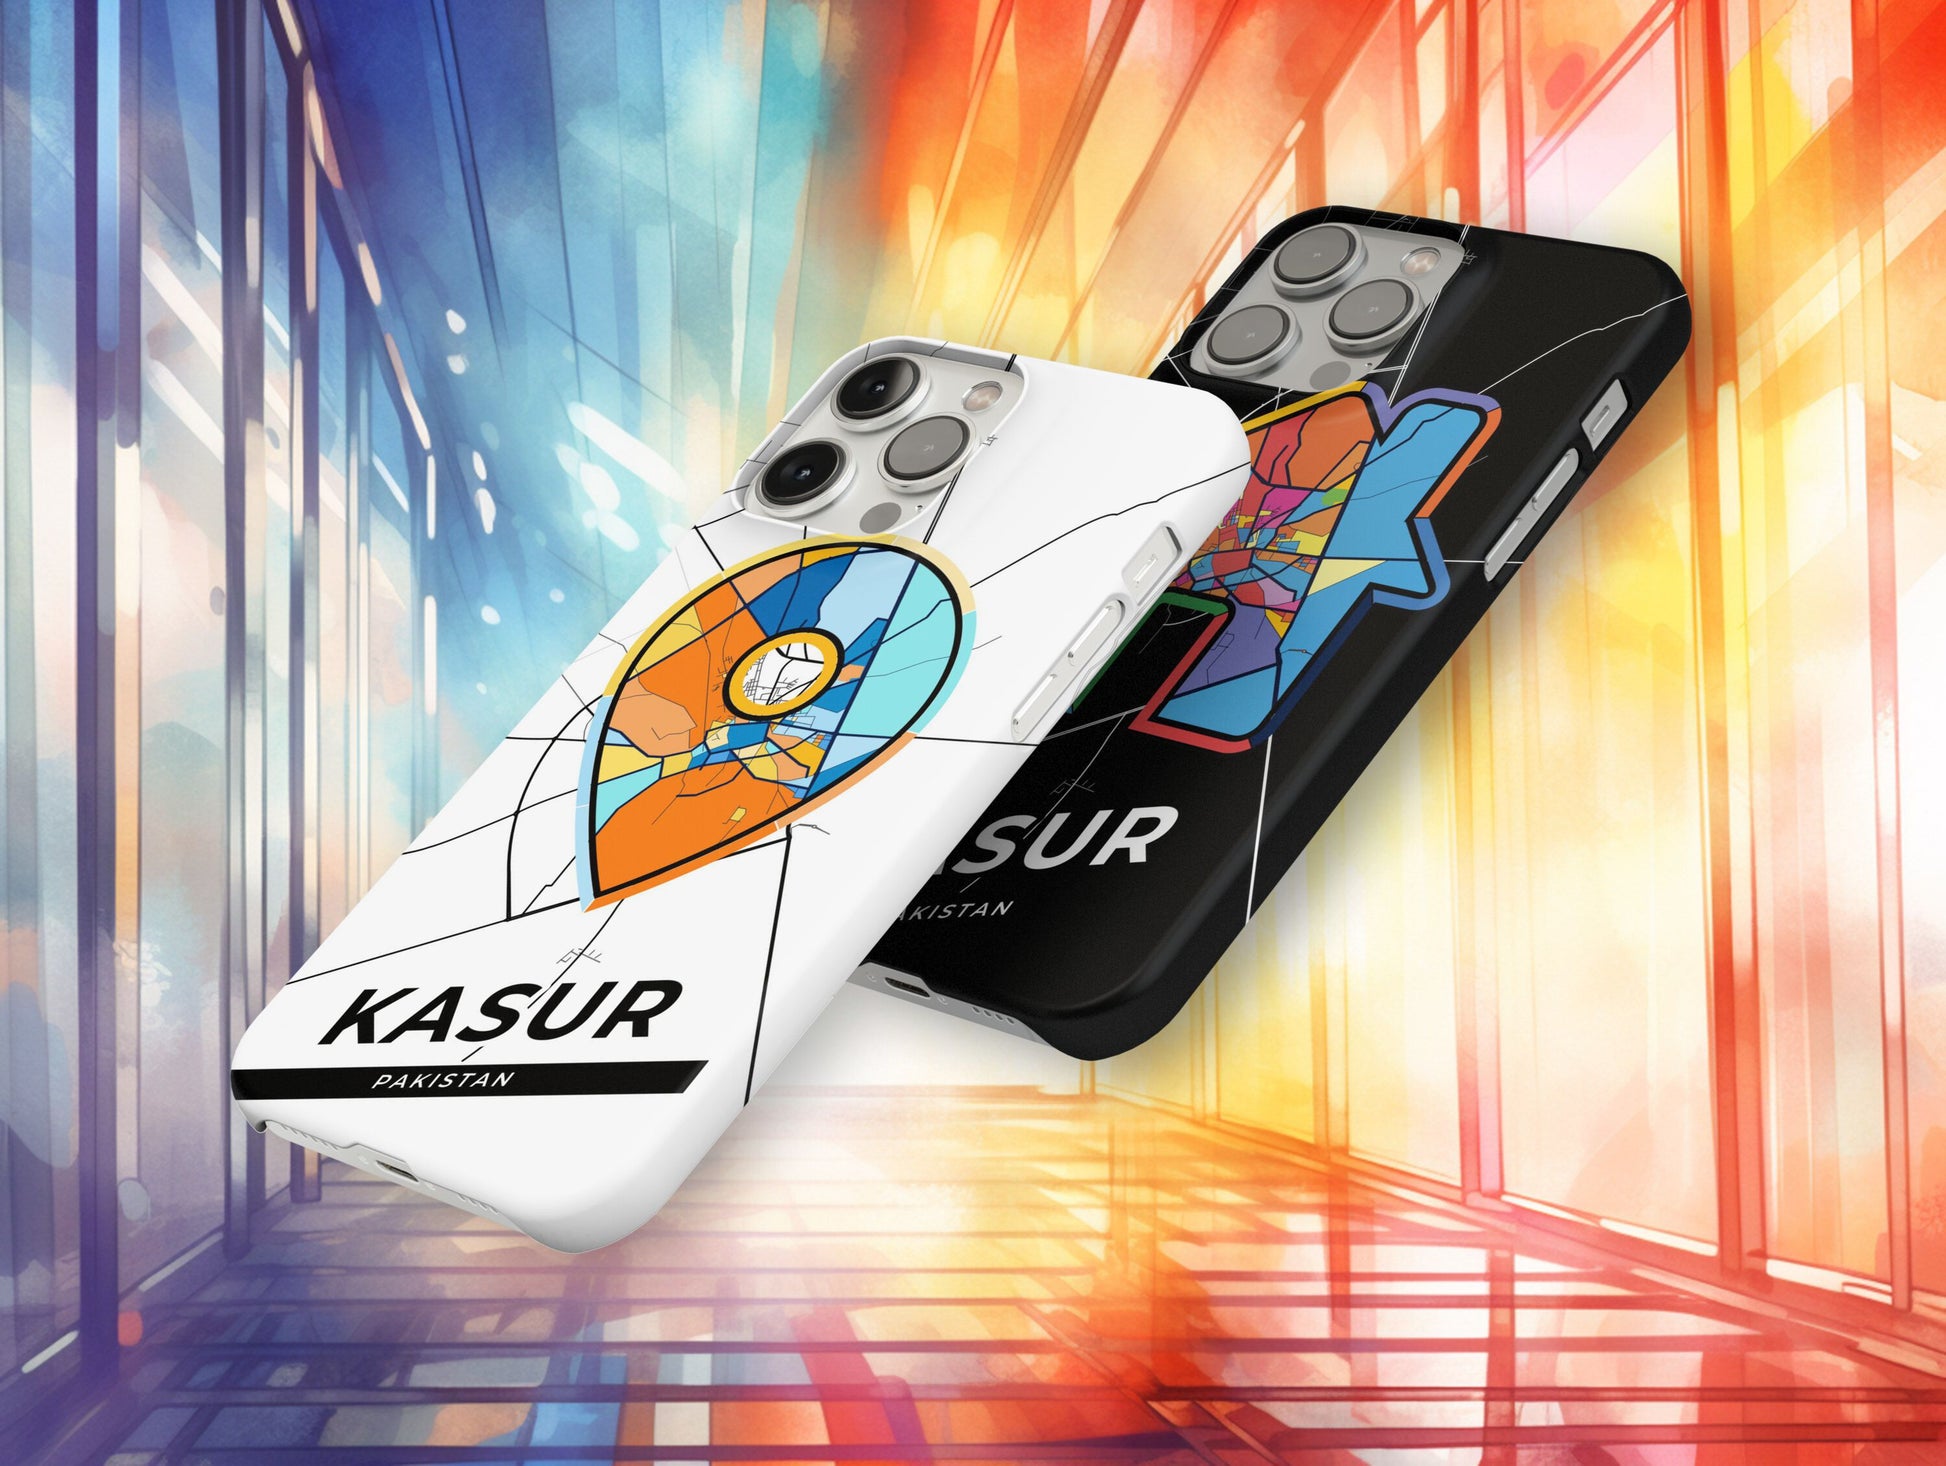 Kasur Pakistan slim phone case with colorful icon. Birthday, wedding or housewarming gift. Couple match cases.